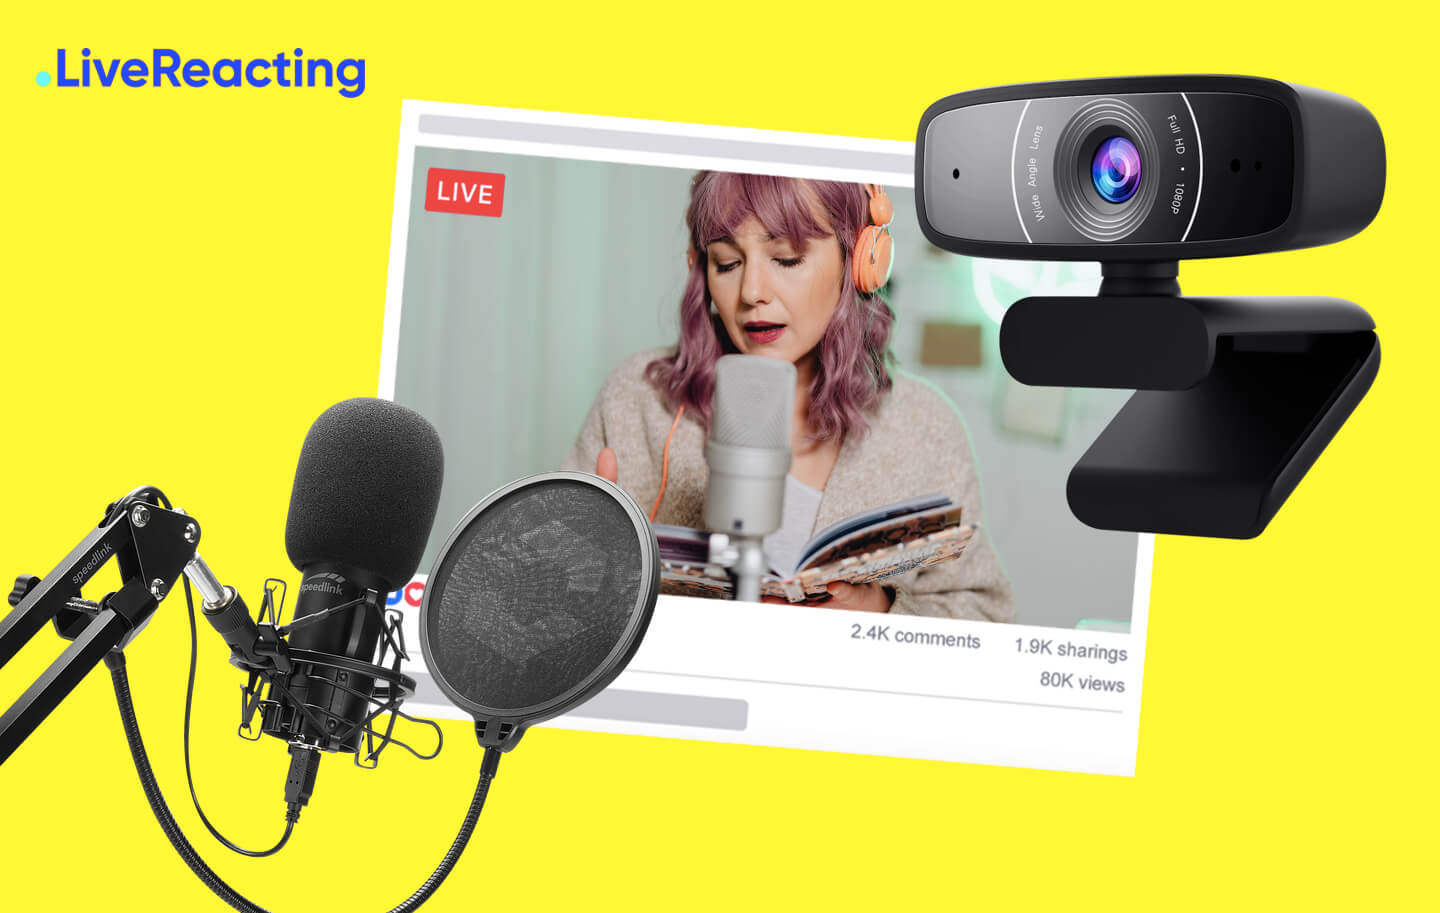 Livestream with external camera and microphone